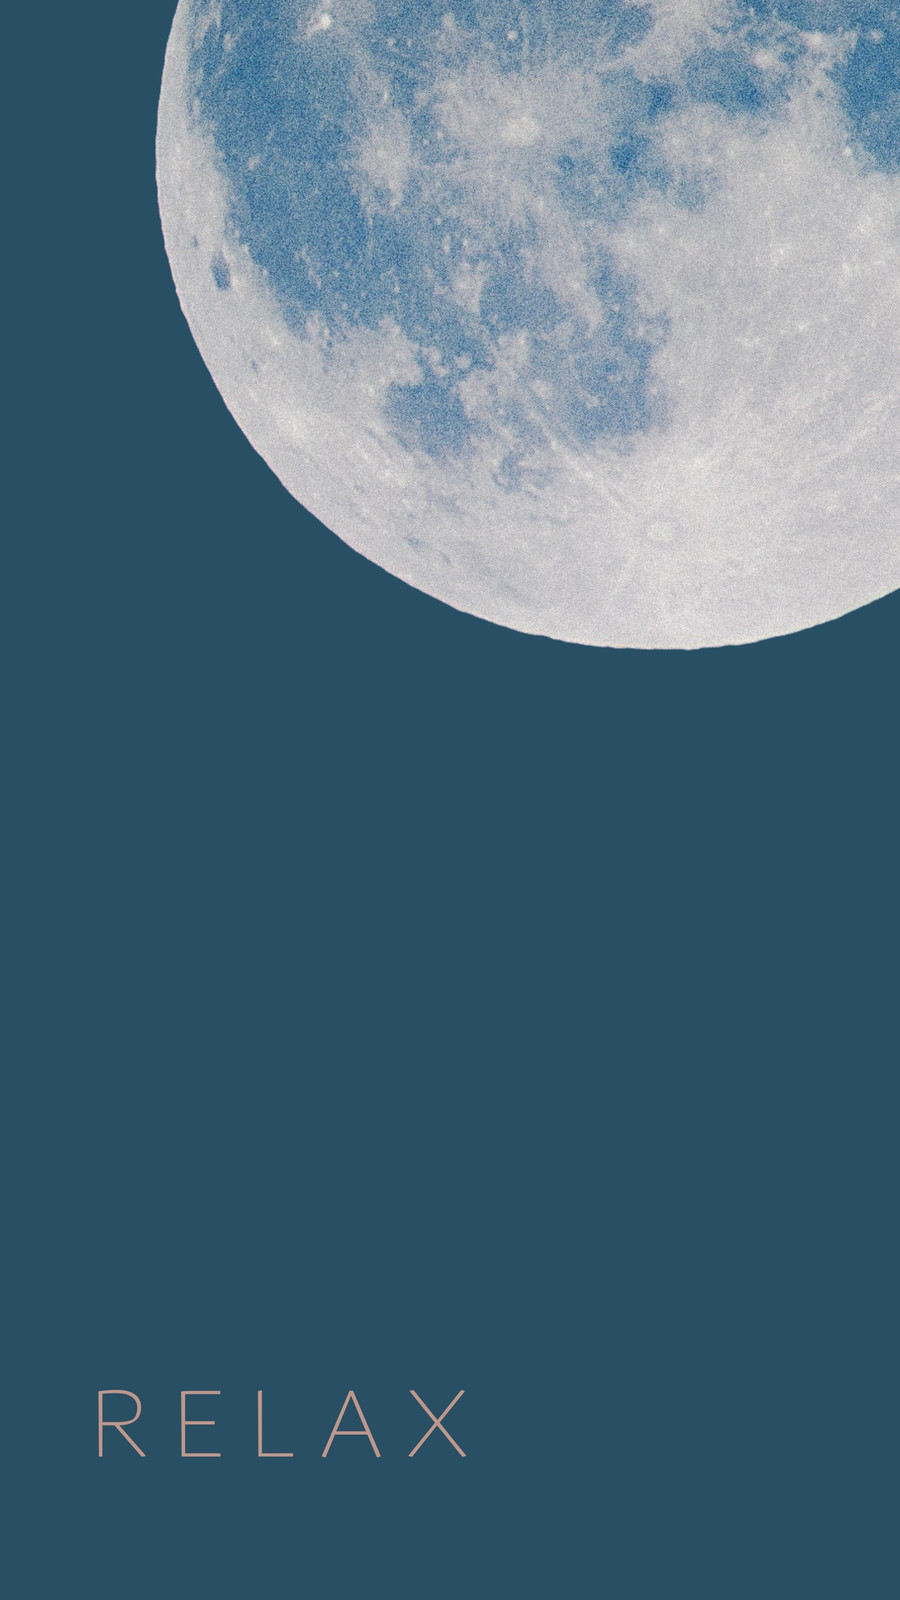 75 Moon Wallpaper Backgrounds For Your iPhone 